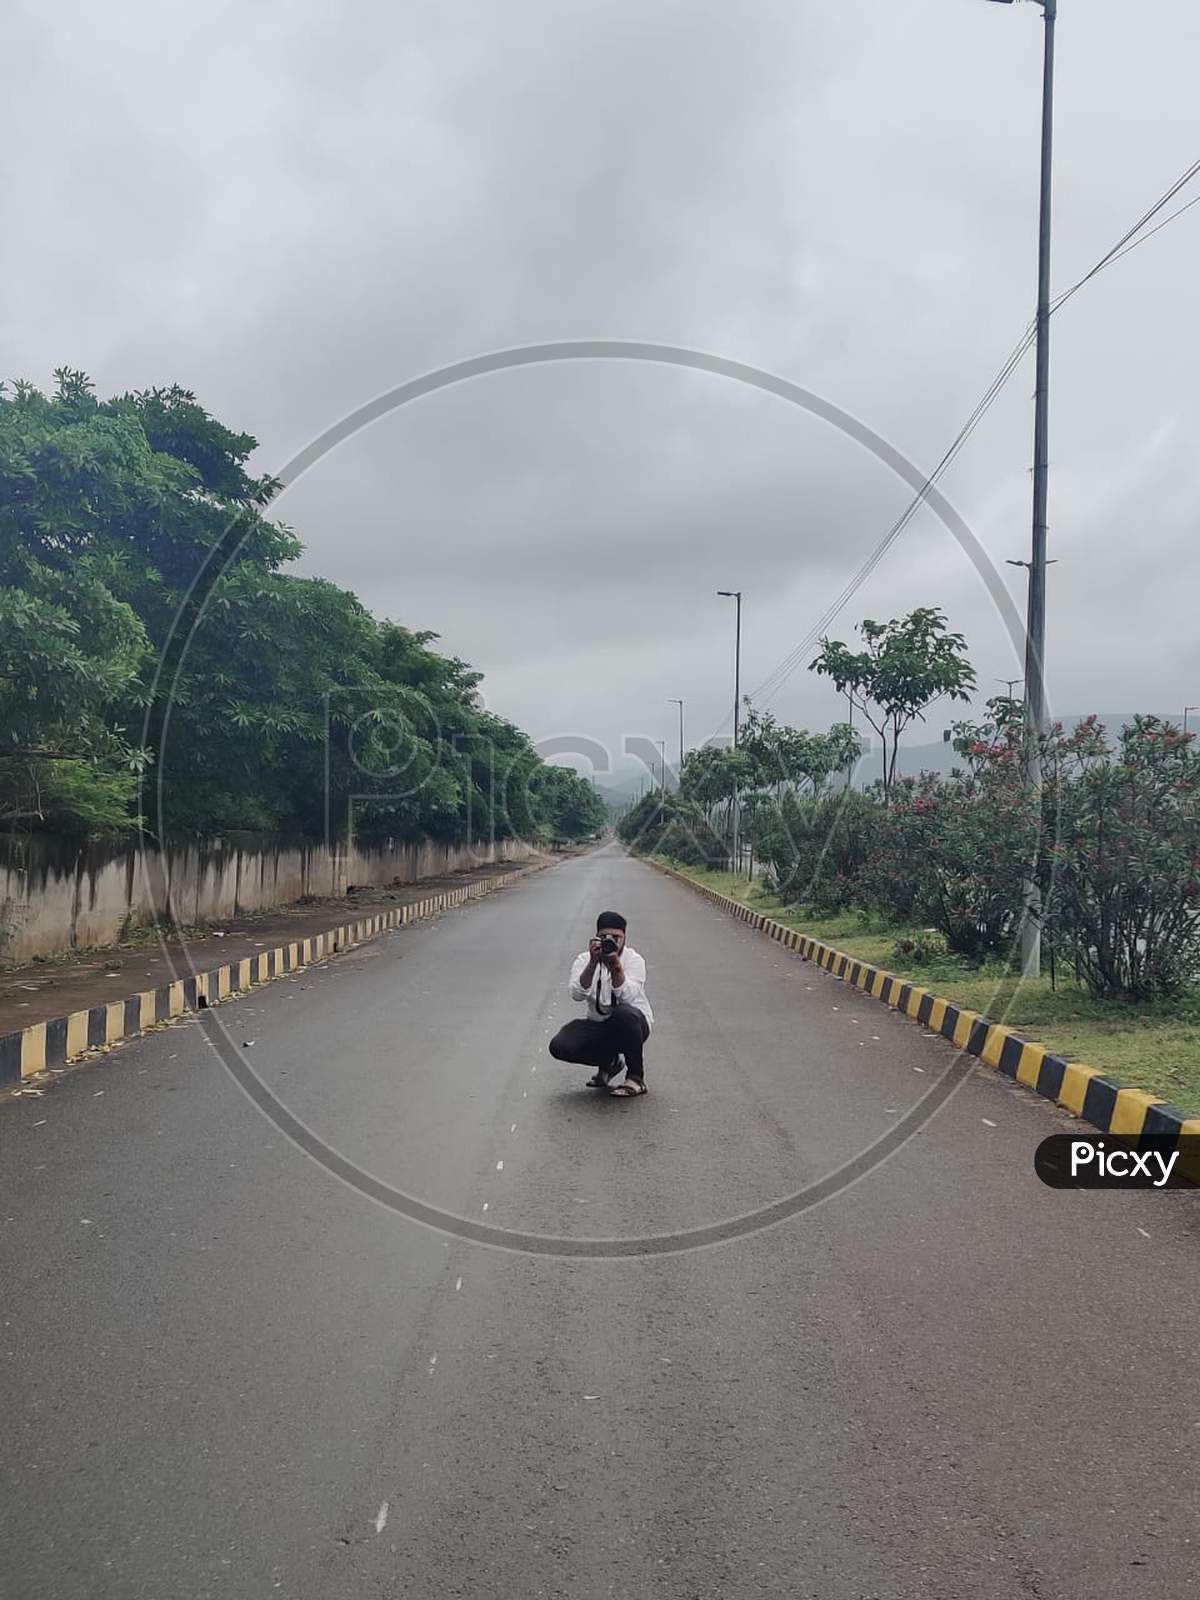 A photographer clicking a photo on an empty Road on a cloudy day in India